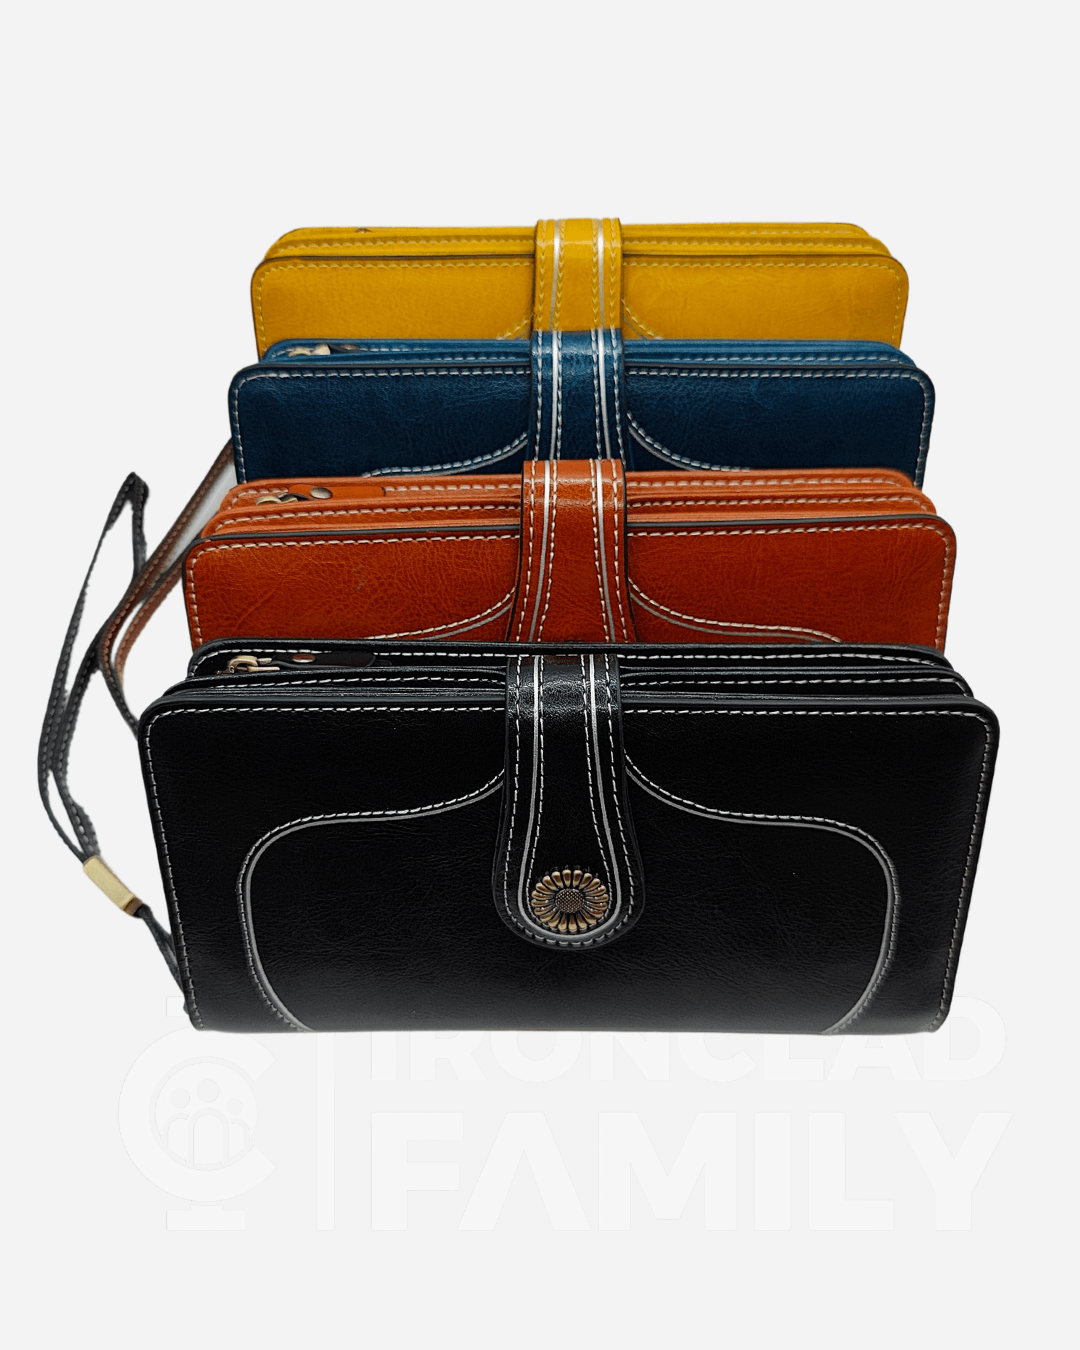 Four RFID blocking wallets in various colors displayed together